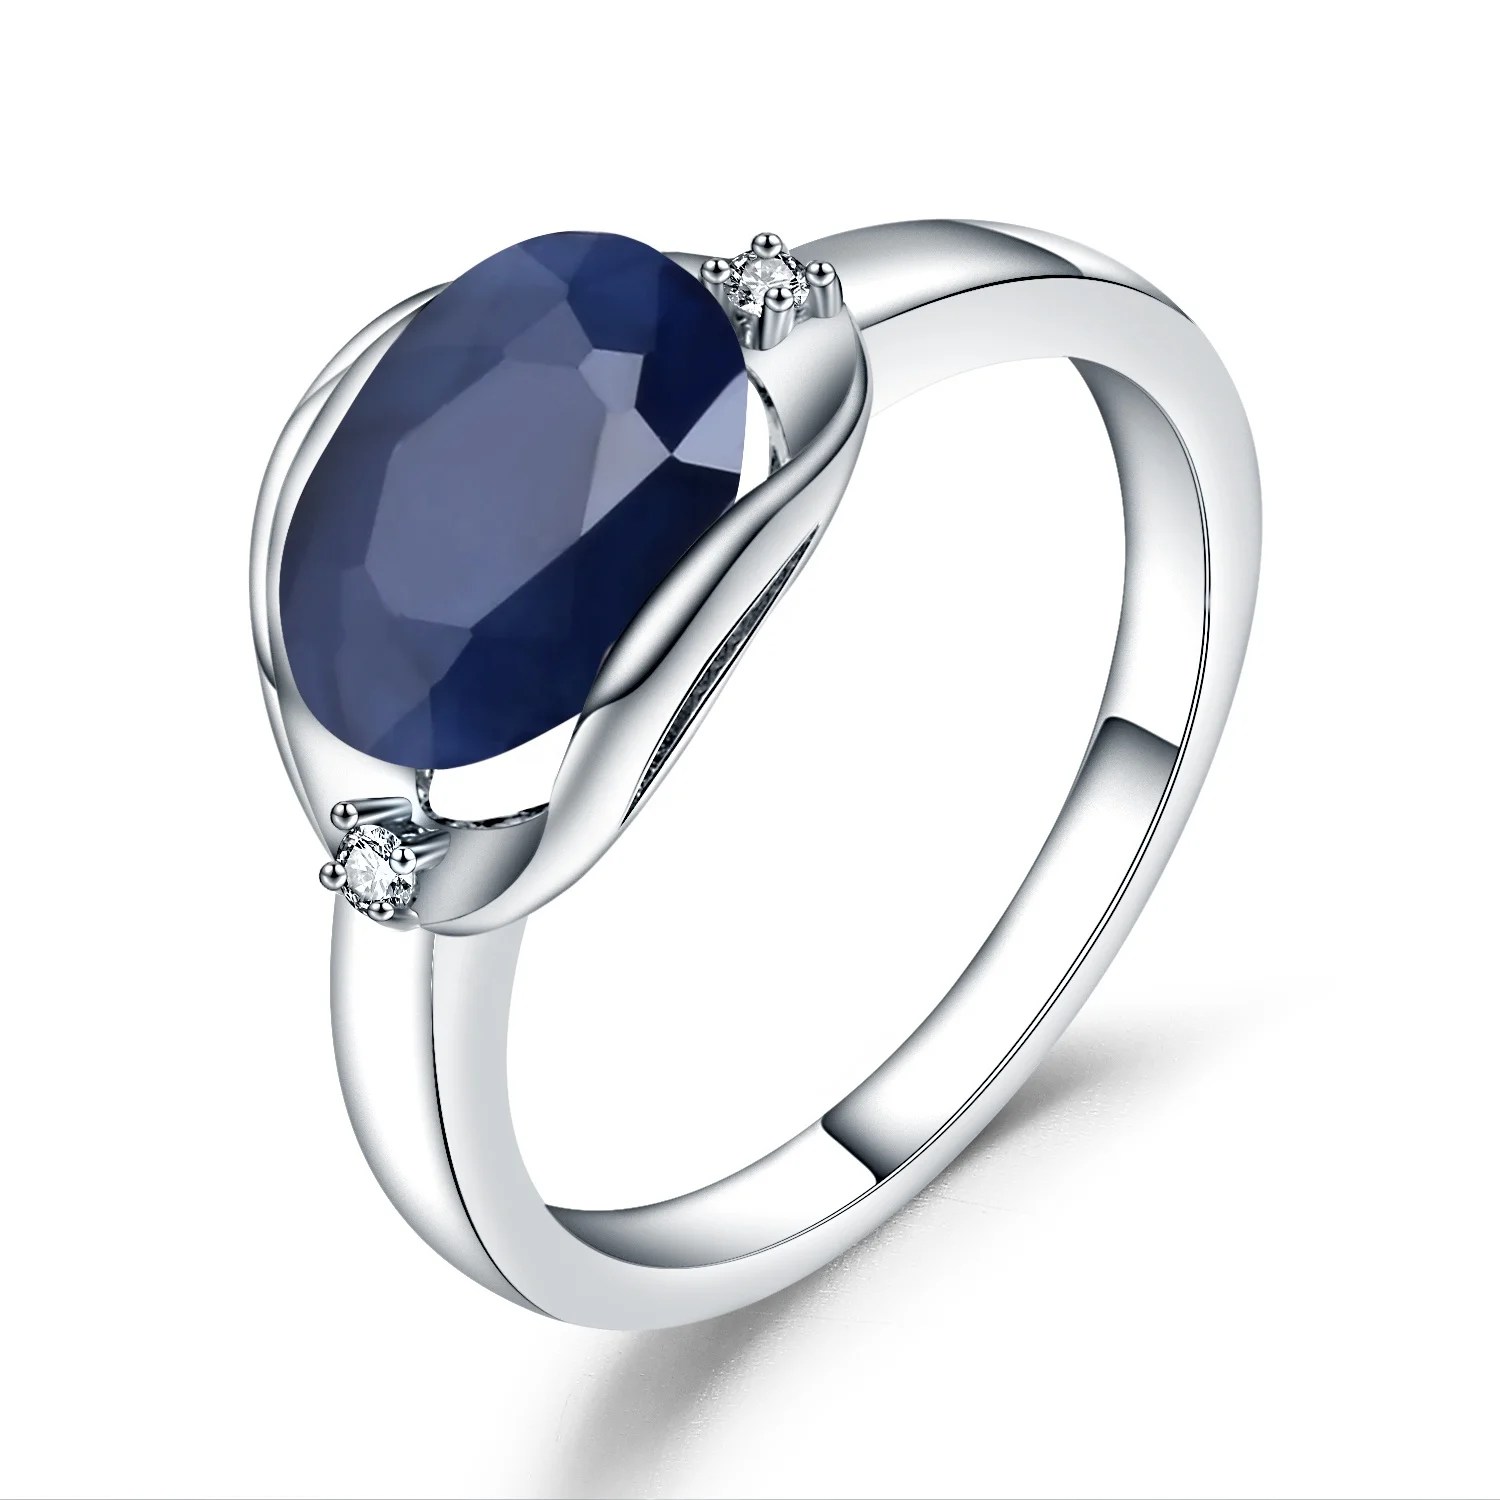 

Abiding Perfect Natural Blue Sapphire Rings Oval Women Anniversary Gift Jewelry 925 Sterling Silver Rings